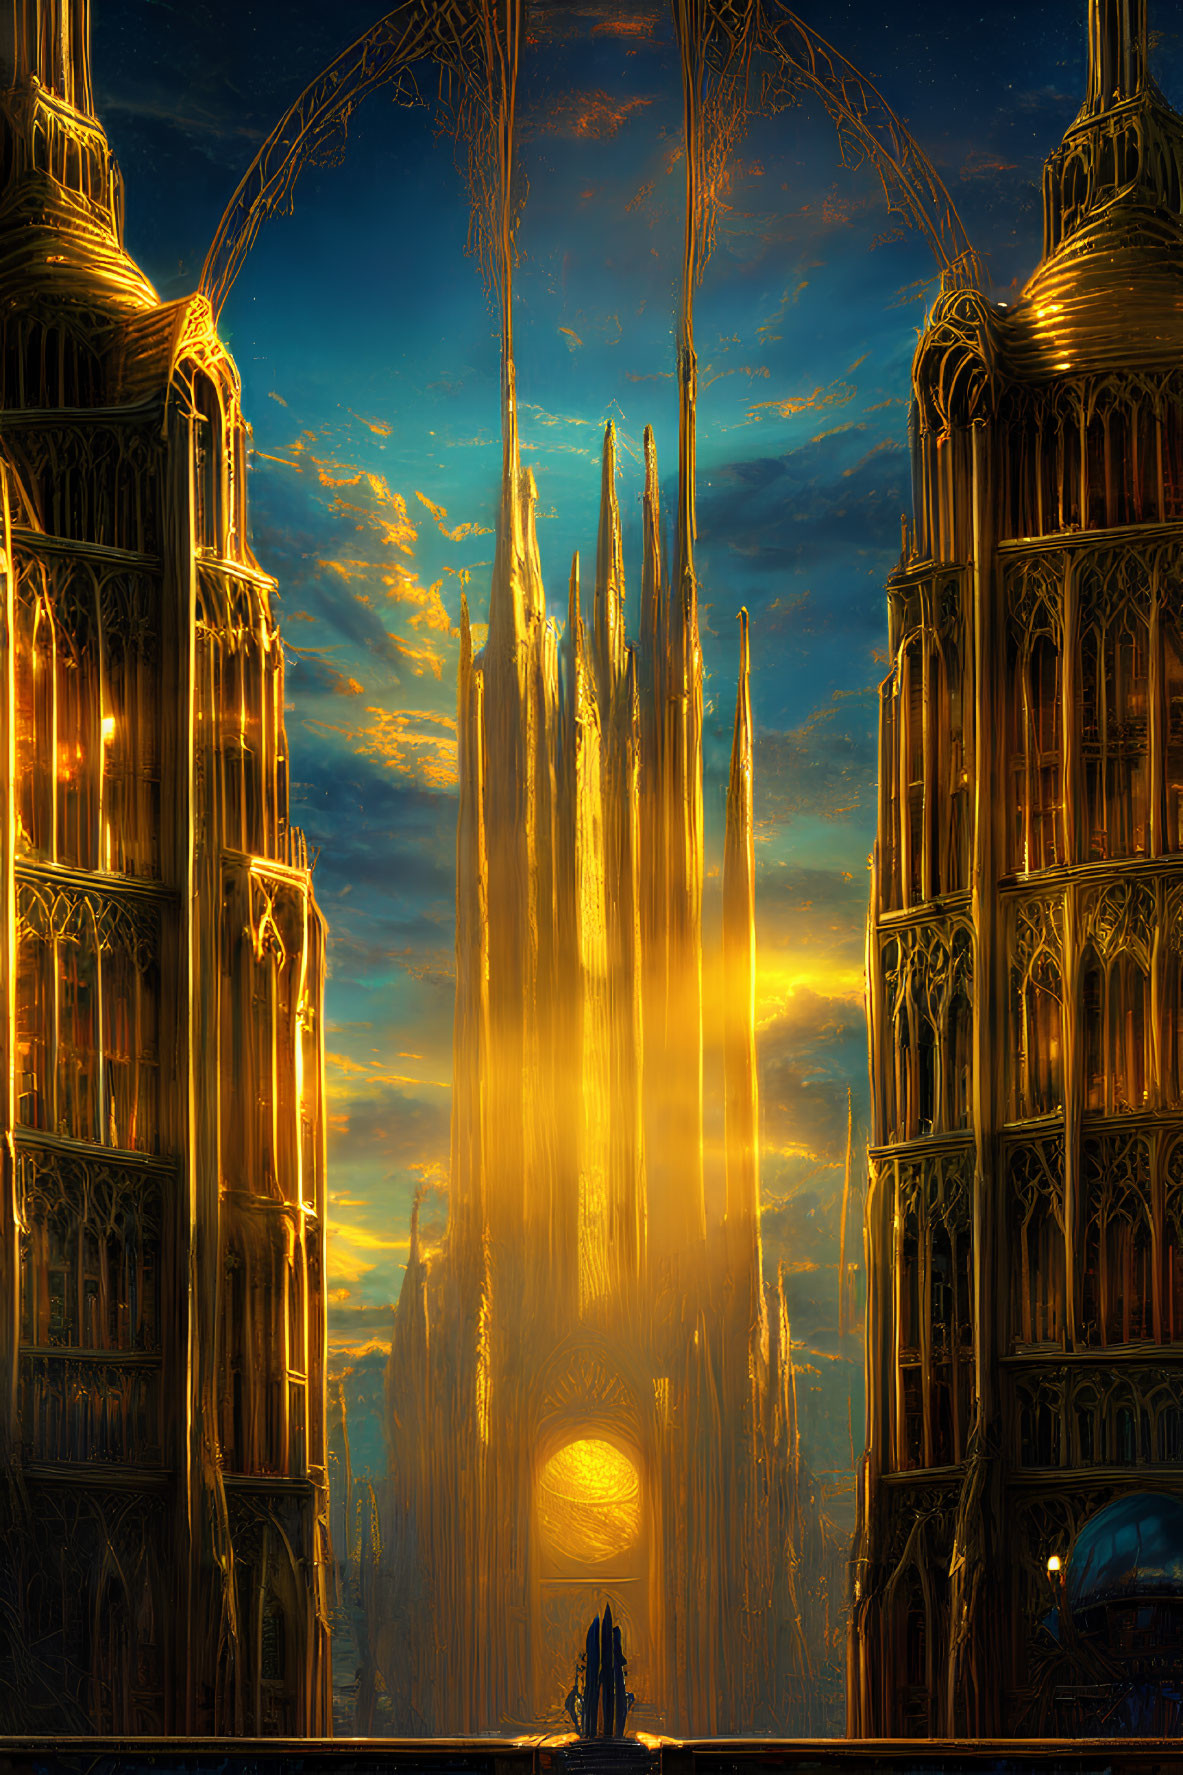 Fantasy cathedral with soaring spires in vibrant sunset scene